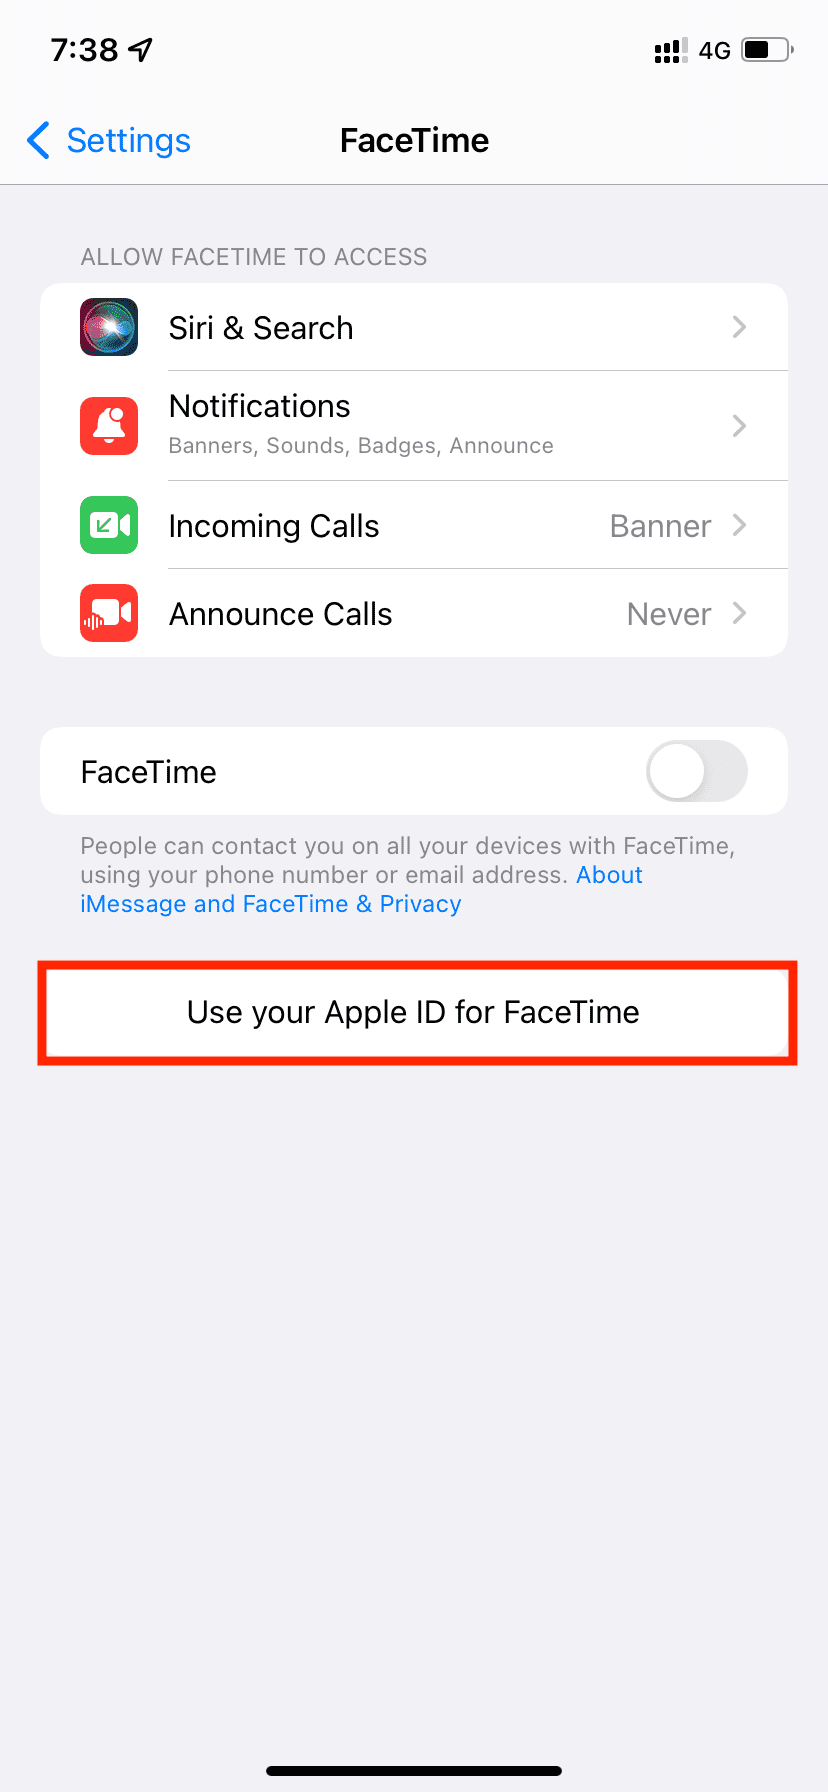 Use your Apple ID for FaceTime